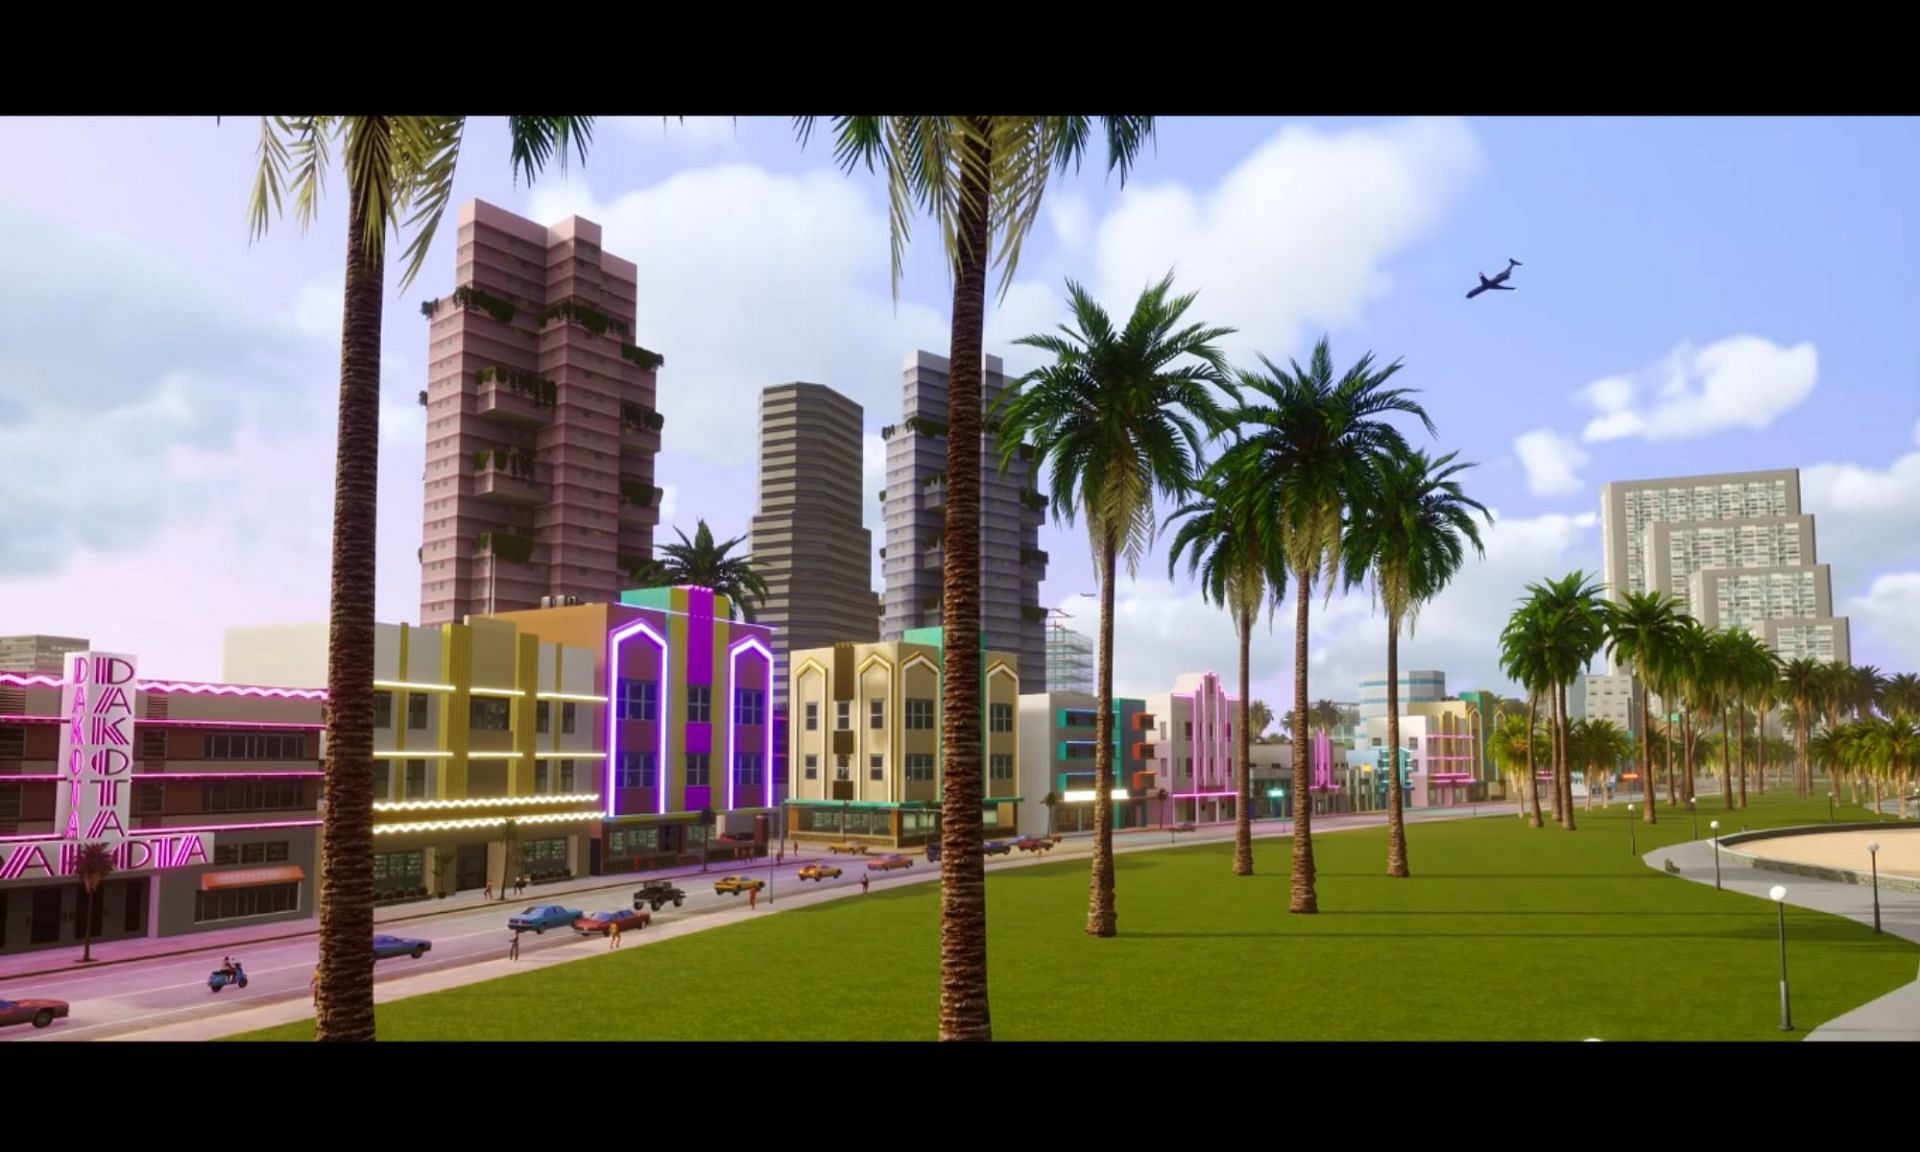 Vice City is more colorful than it ever was before (Image via Rockstar Games)